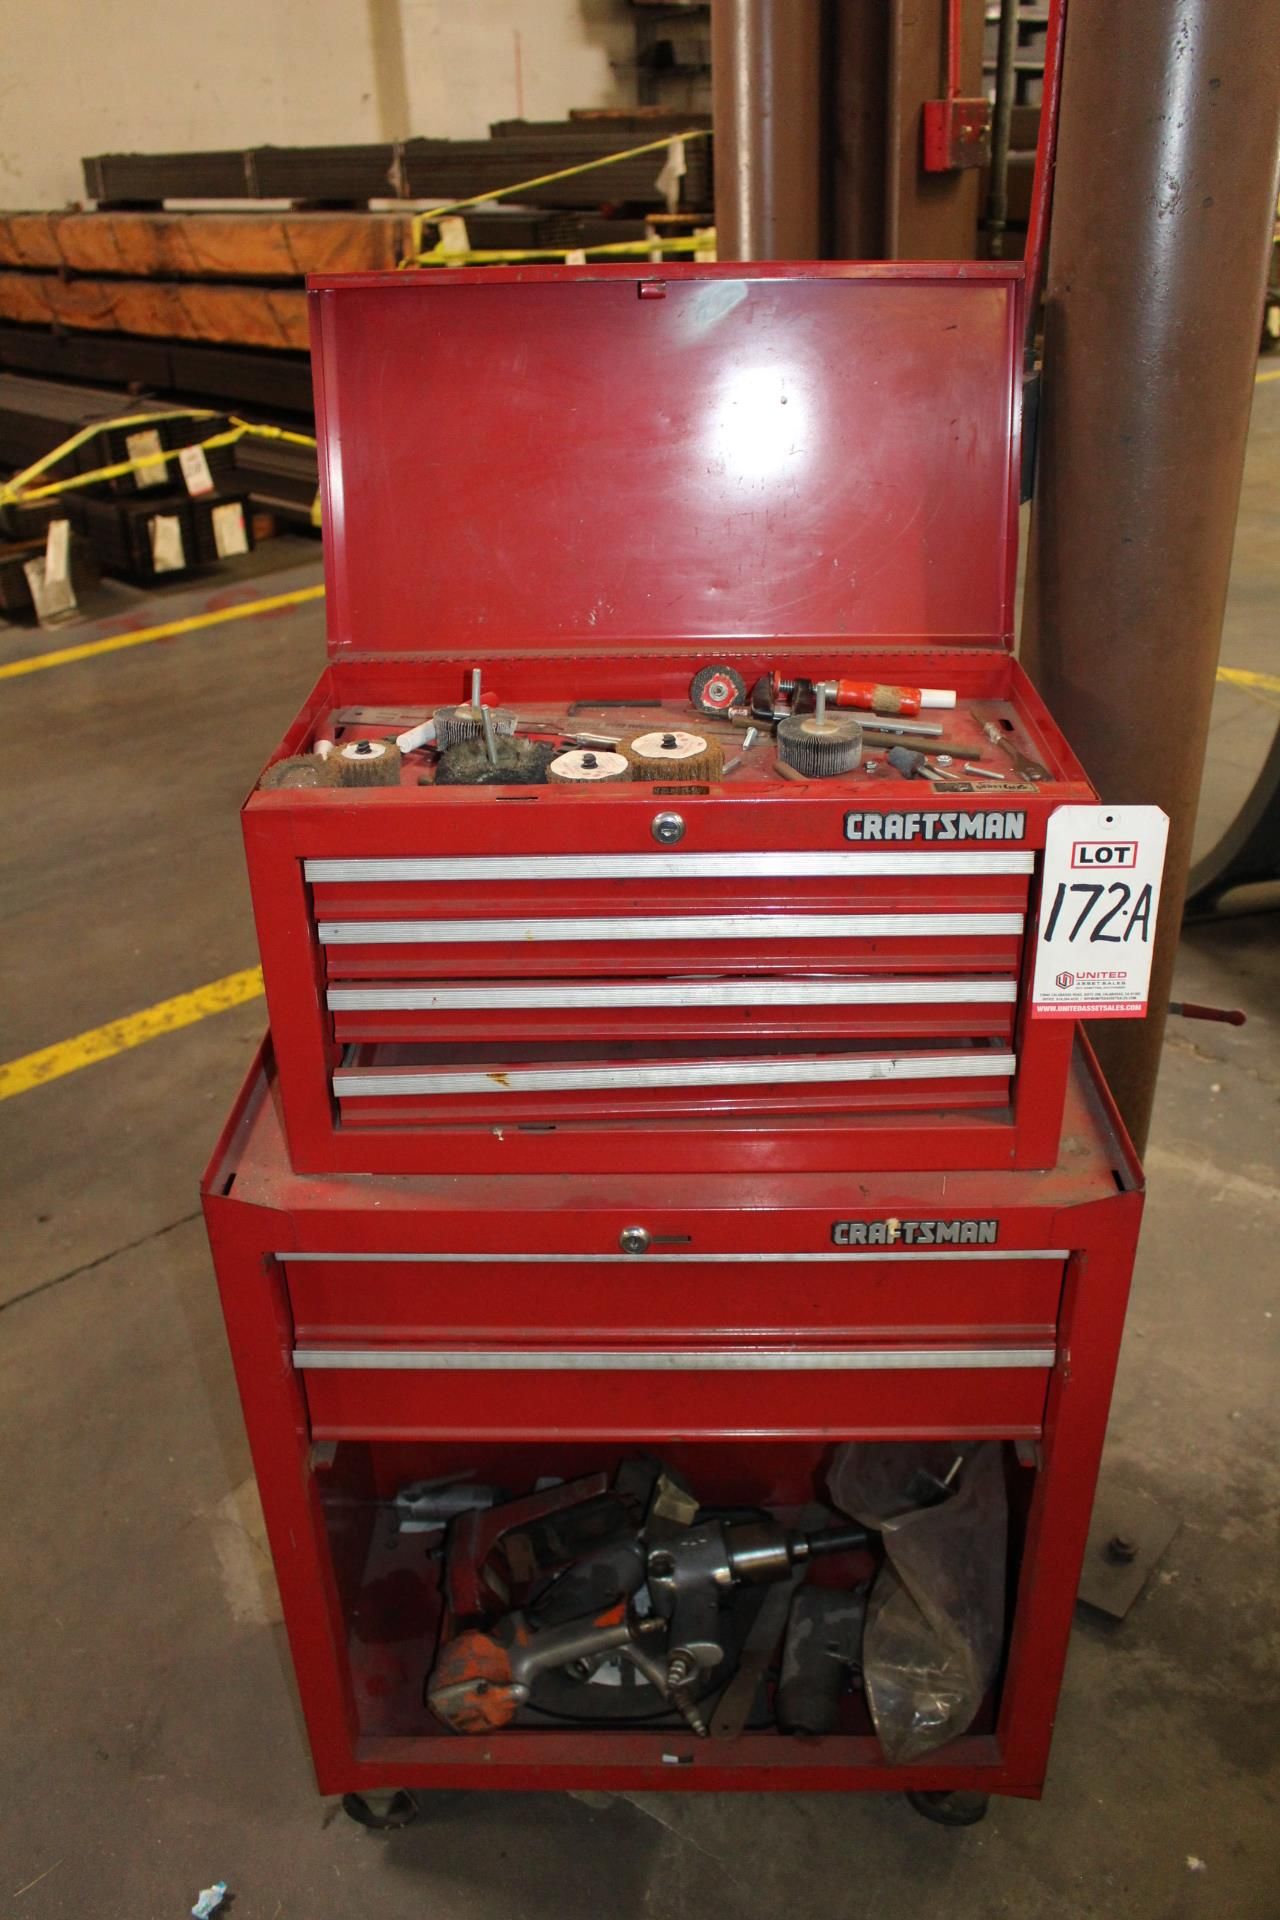 LOT - CRAFTSMAN ROLLAWAY TOOL BOX W/ TOPPER CONTAINING SEVERAL PNEUMATIC IMPACT WRENCHES, DIE